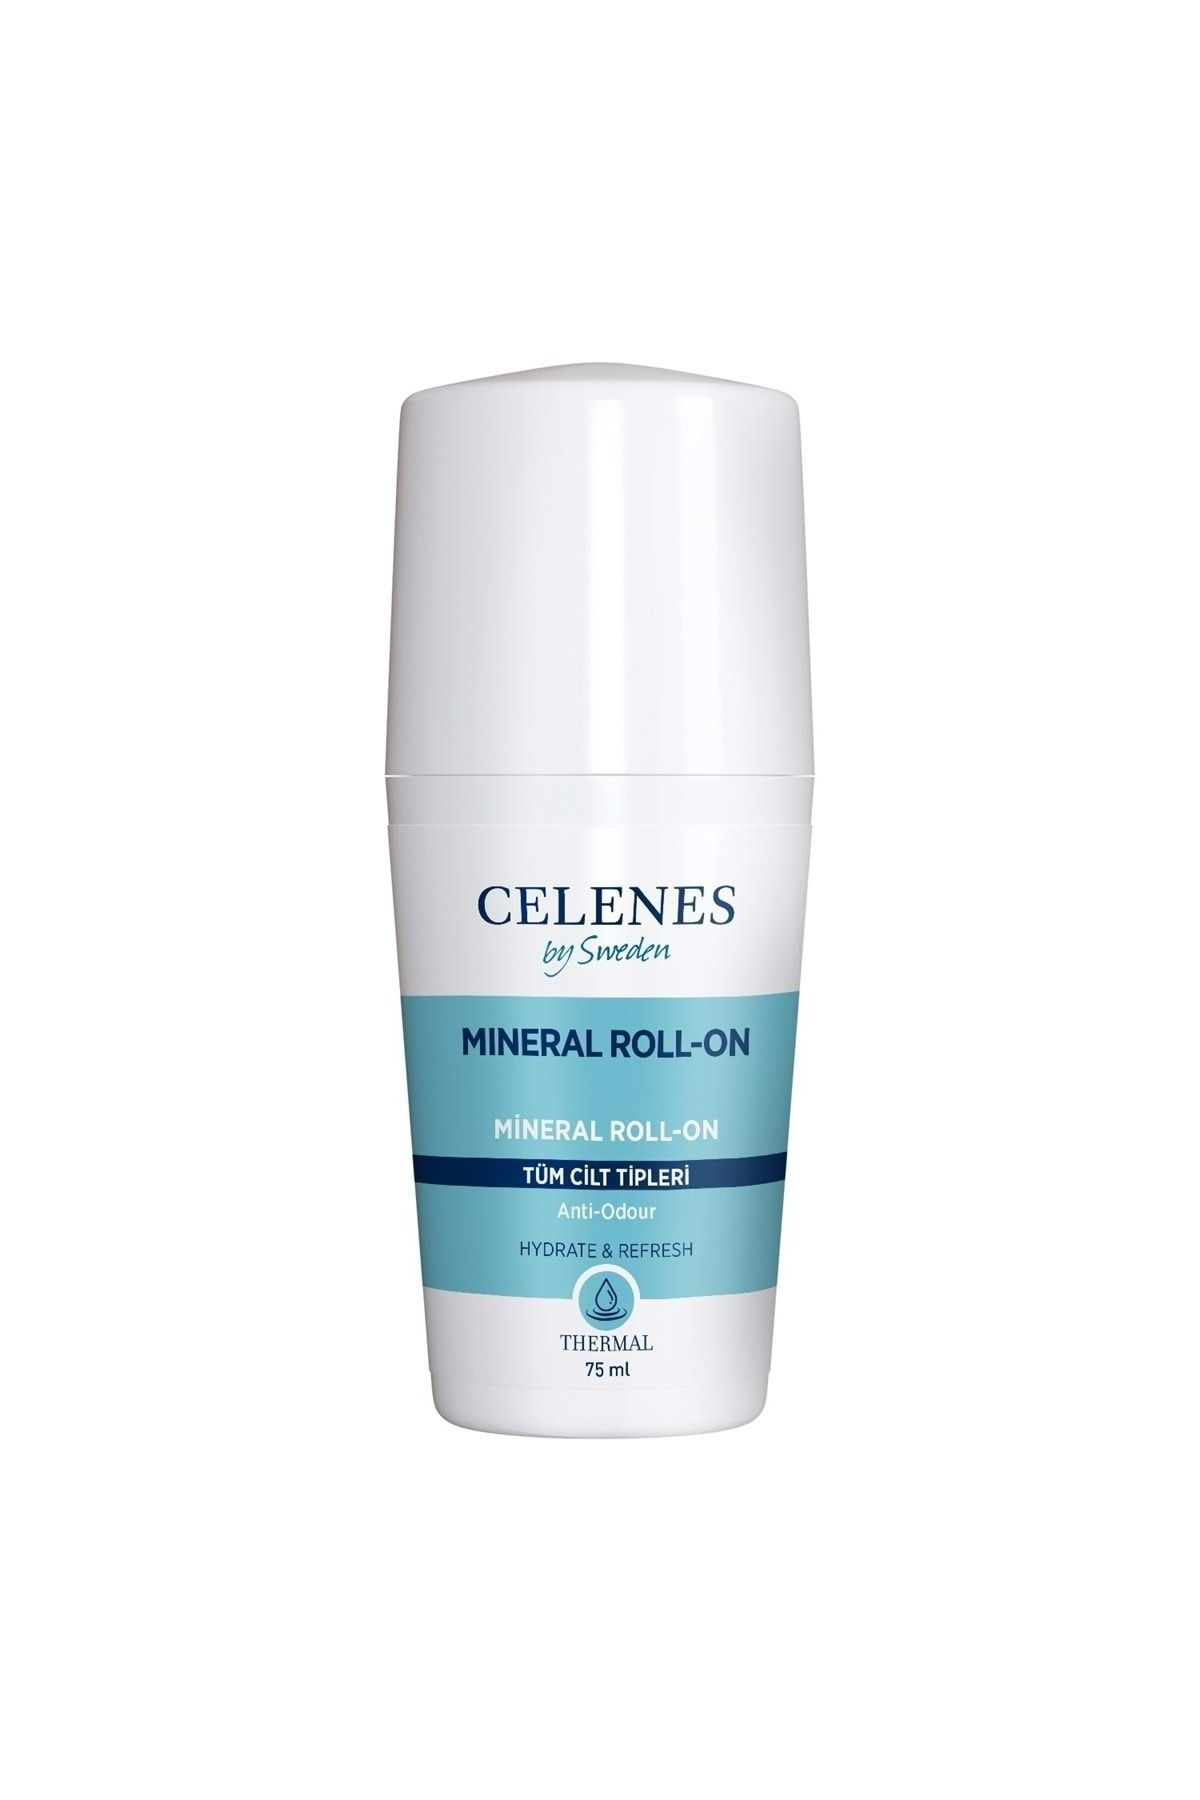 Celenes by Sweden Thermal Mineral Roll-on 75 Ml.